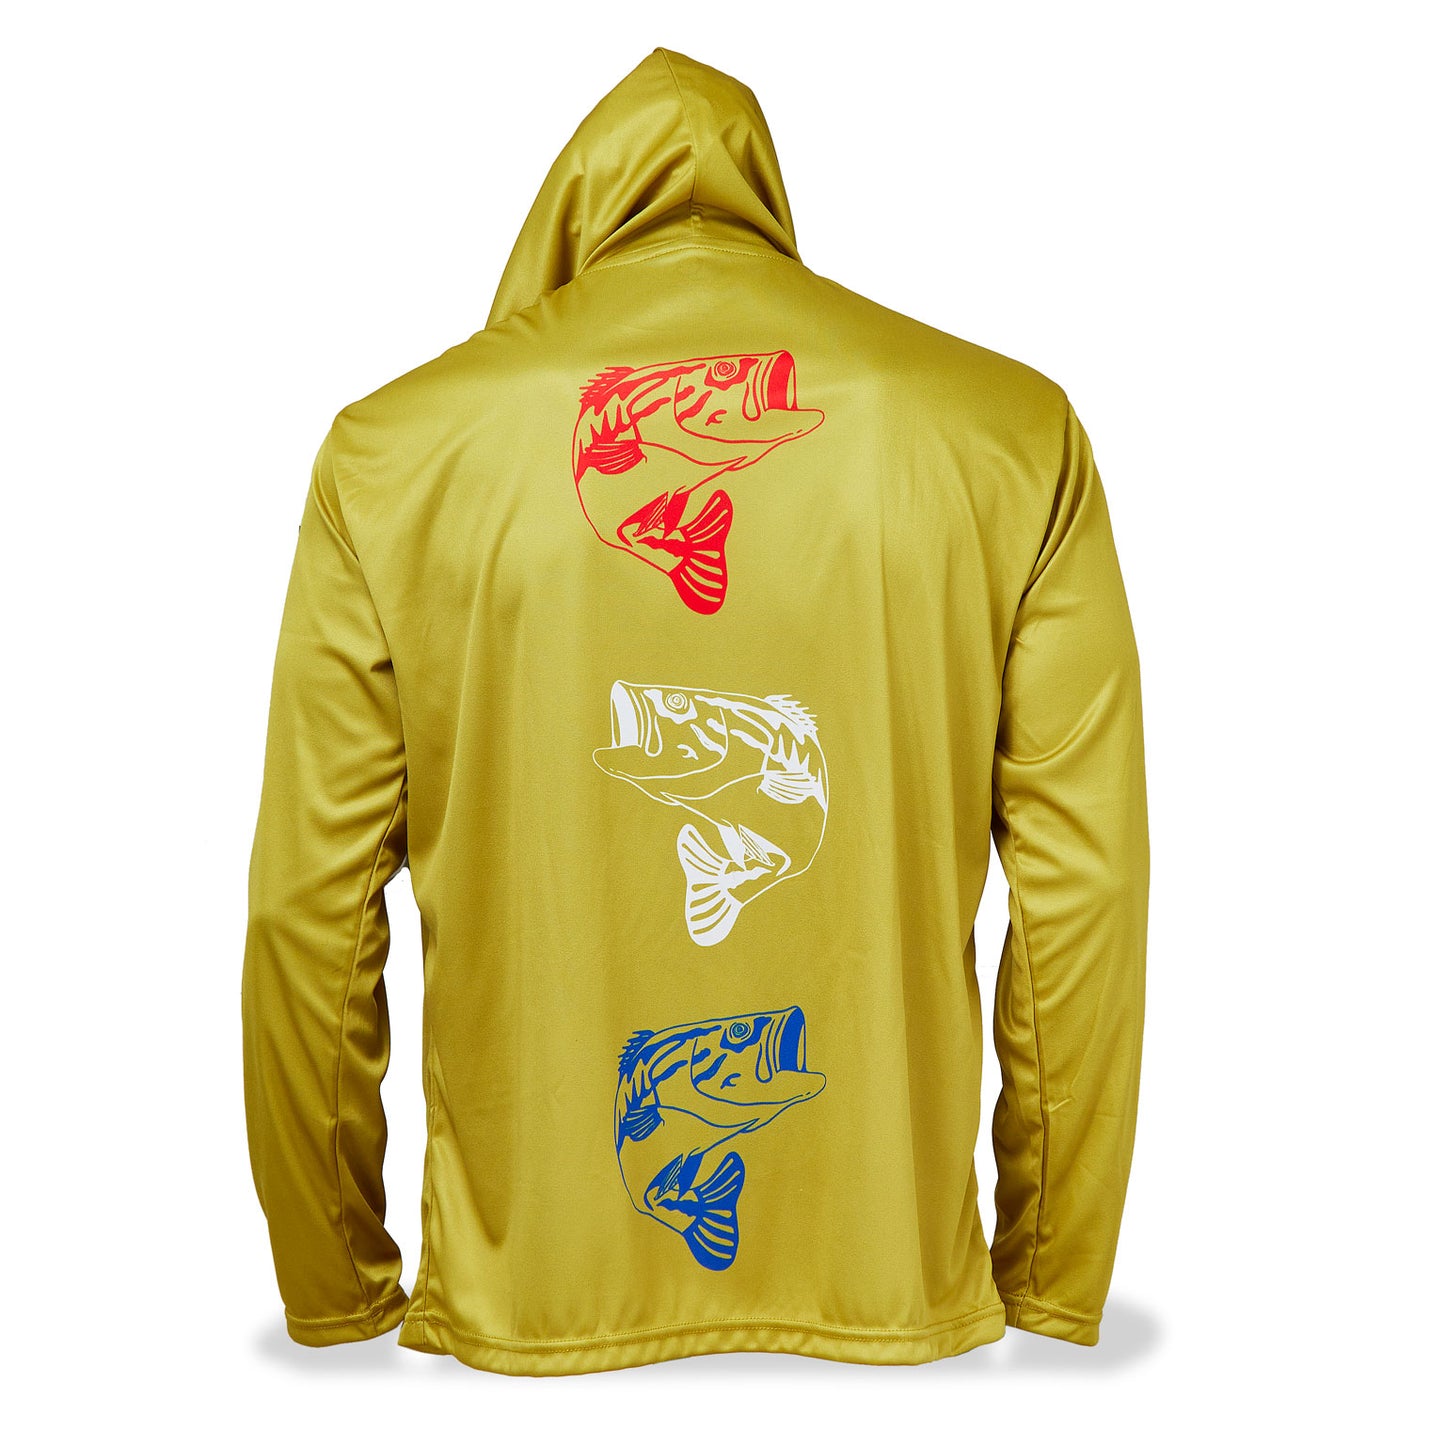 Dead Fish Hook long sleeve hoodie performance fishing shirt for men in mustard yellow with three red white and blue colored fish print back view